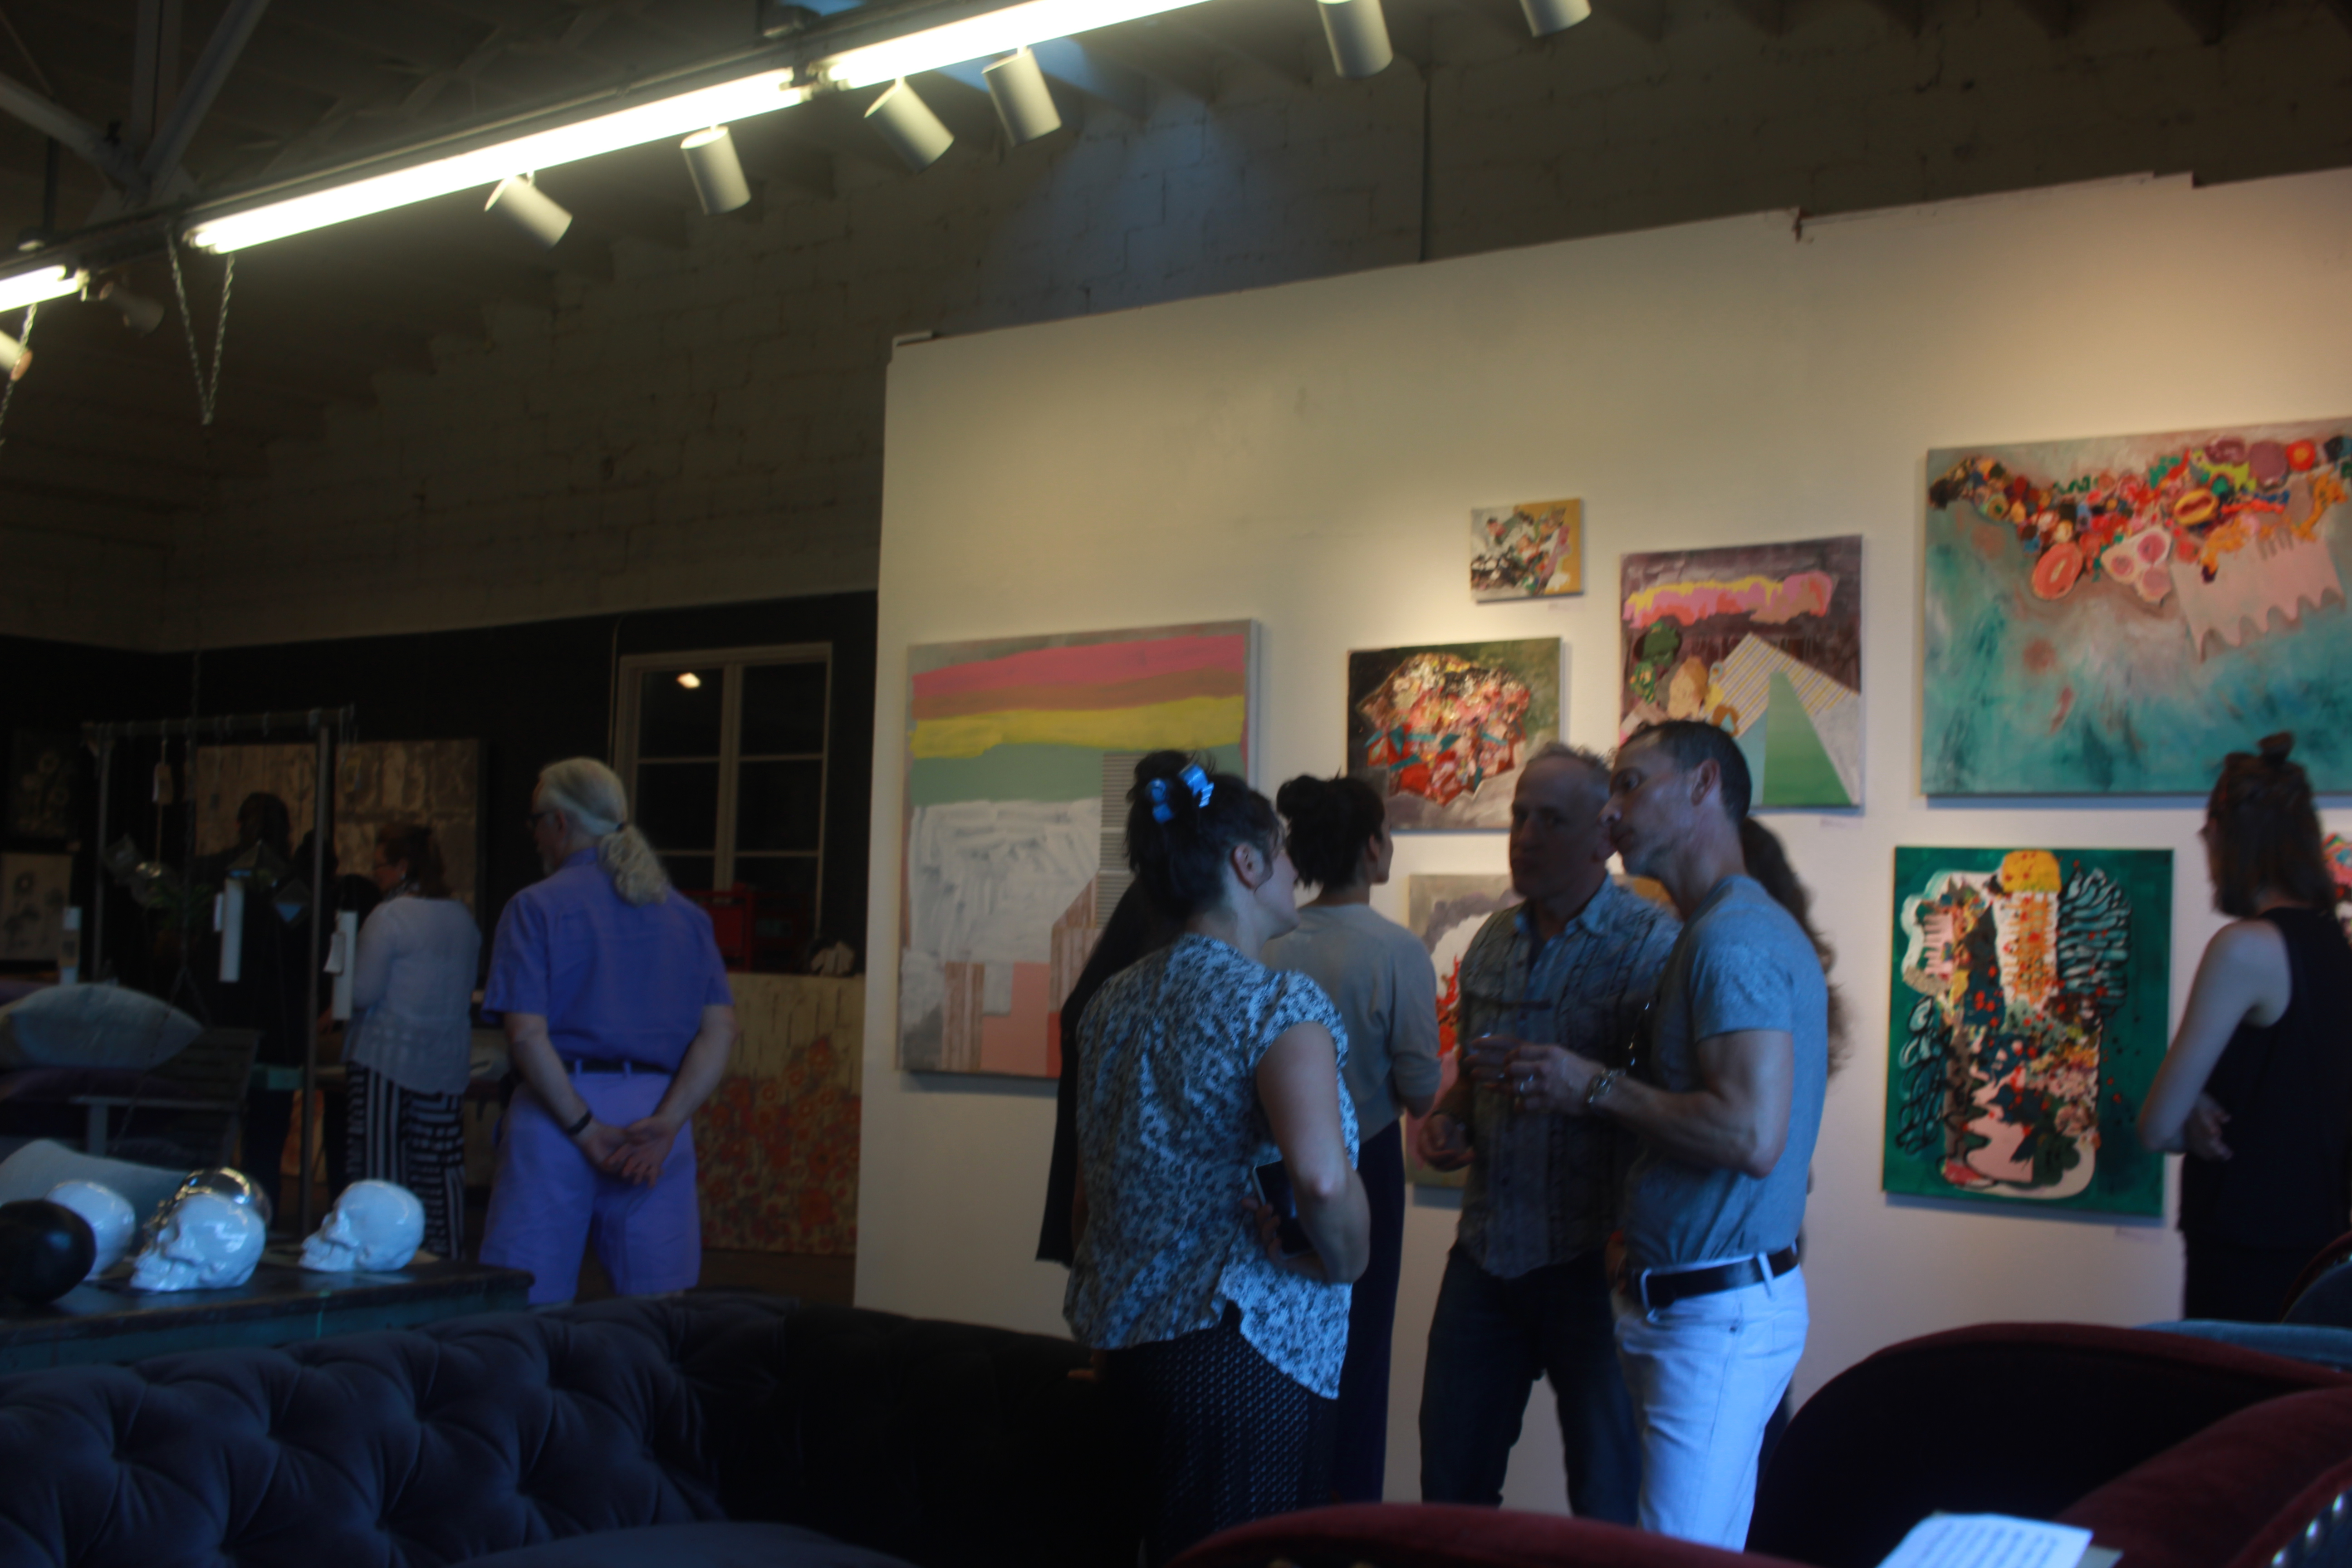 uests chat at the gallery opening of Ursula Gullow's exhibit 'Confetti' on June 10th at London District Studios.